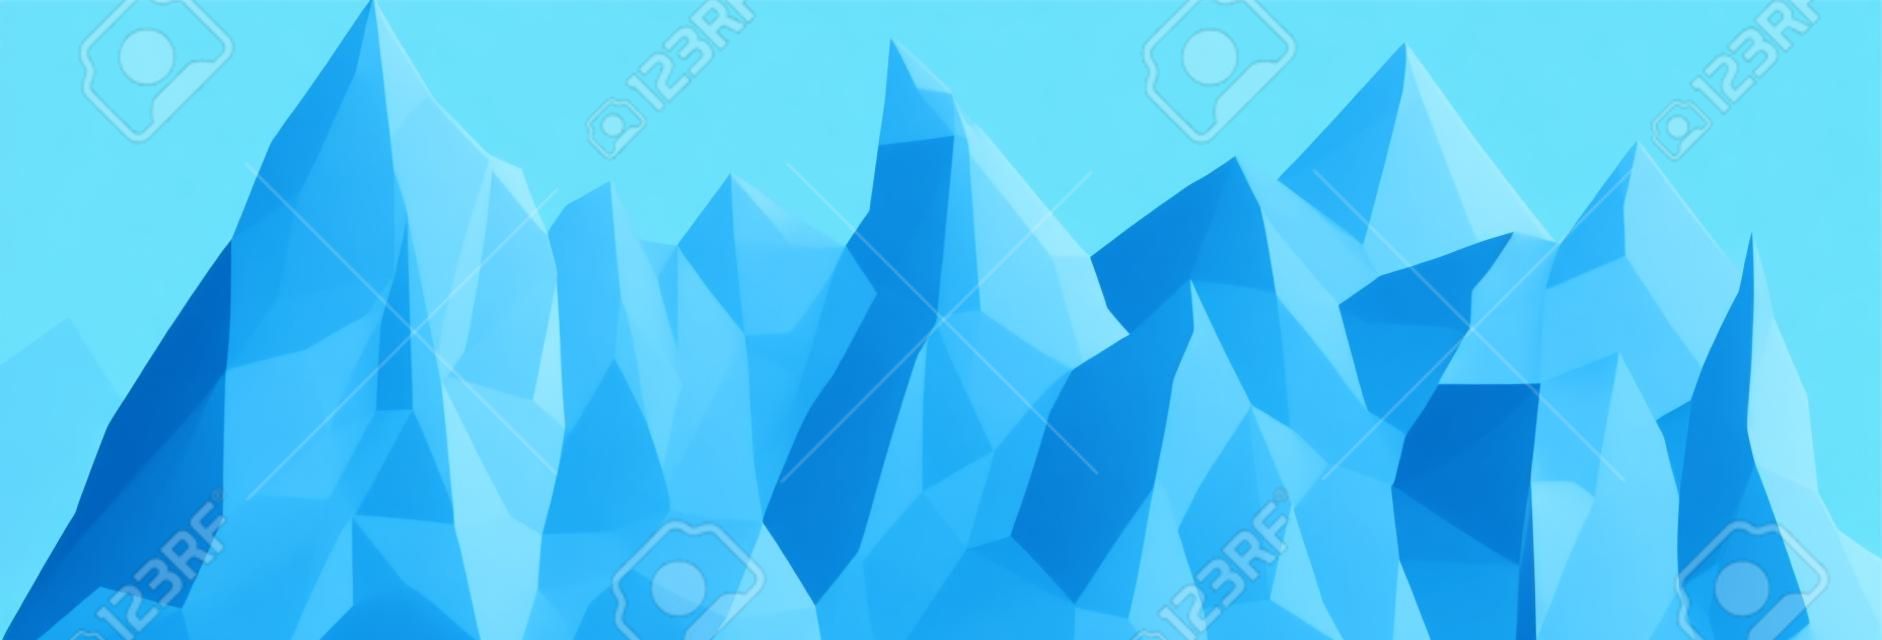 Monochrome mountains in low poly style. Polygonal mountain ridges. Vector landscape background